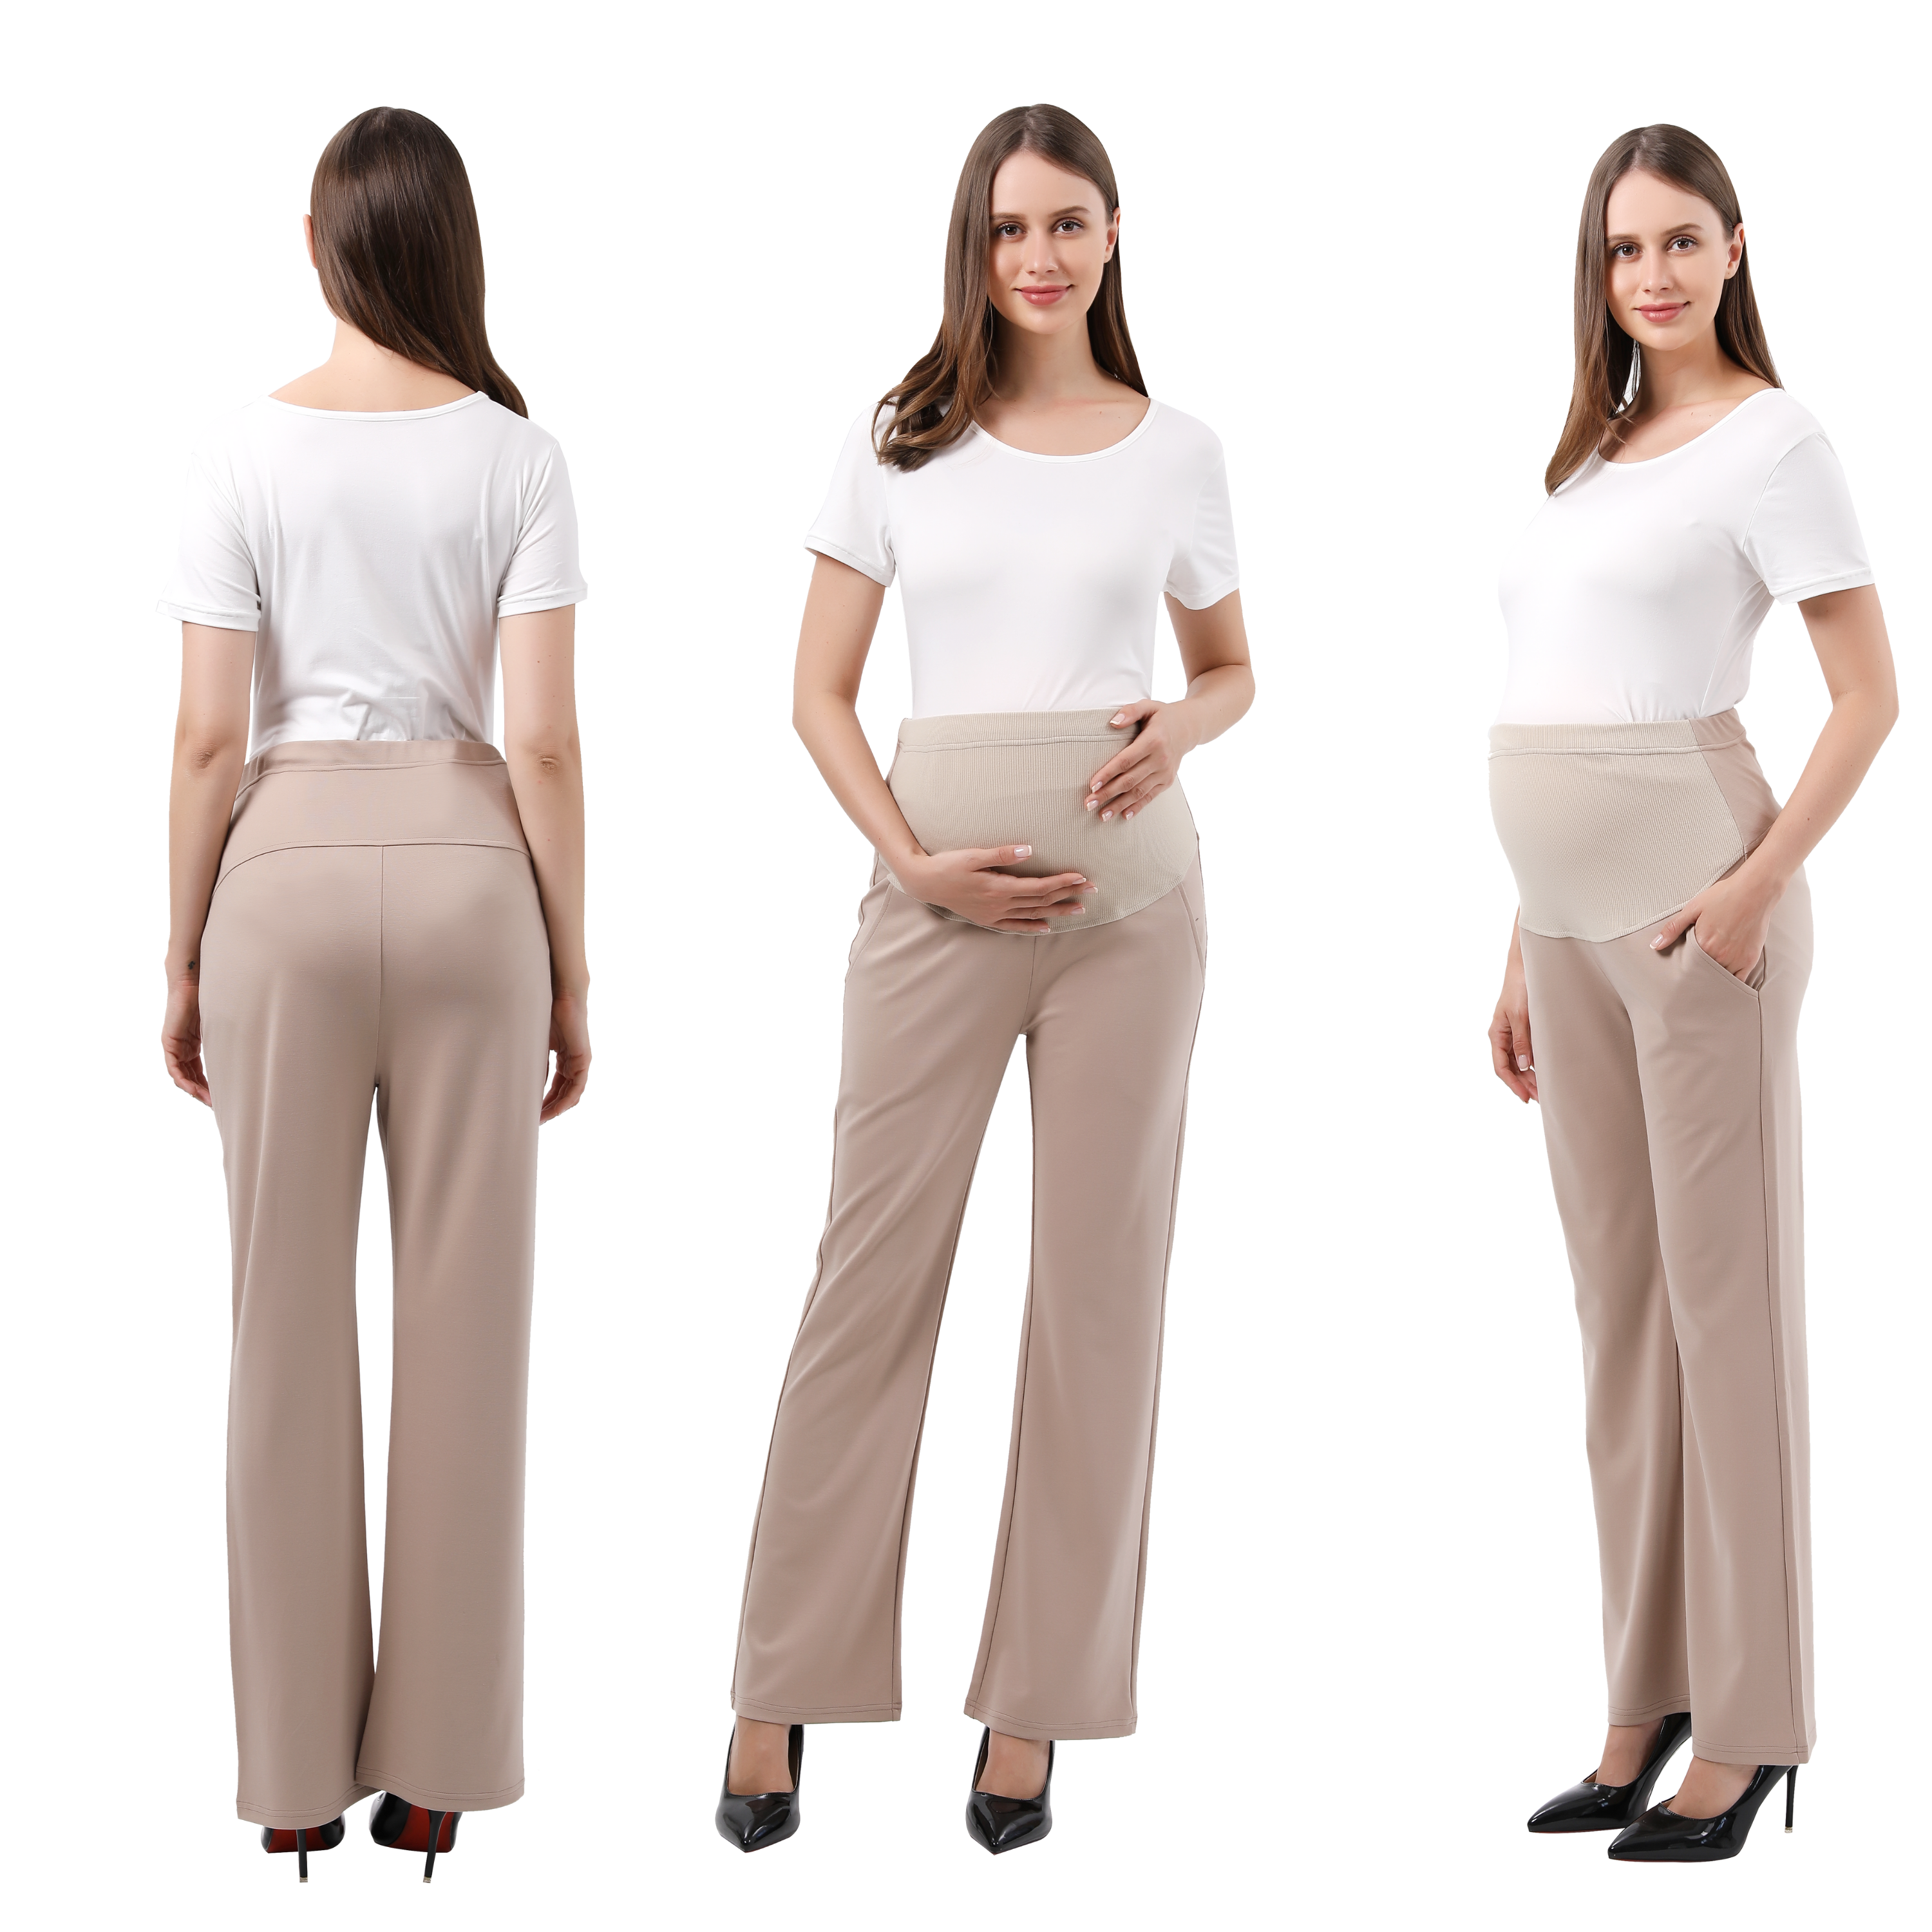 Maternity Pants WomenS Maternity Trousers Leggings Solid Color Pregnant  Leggings Pencil Pants Clothes For Pregnant Women LJ201119 From Jiao08,  $10.34 | DHgate.Com